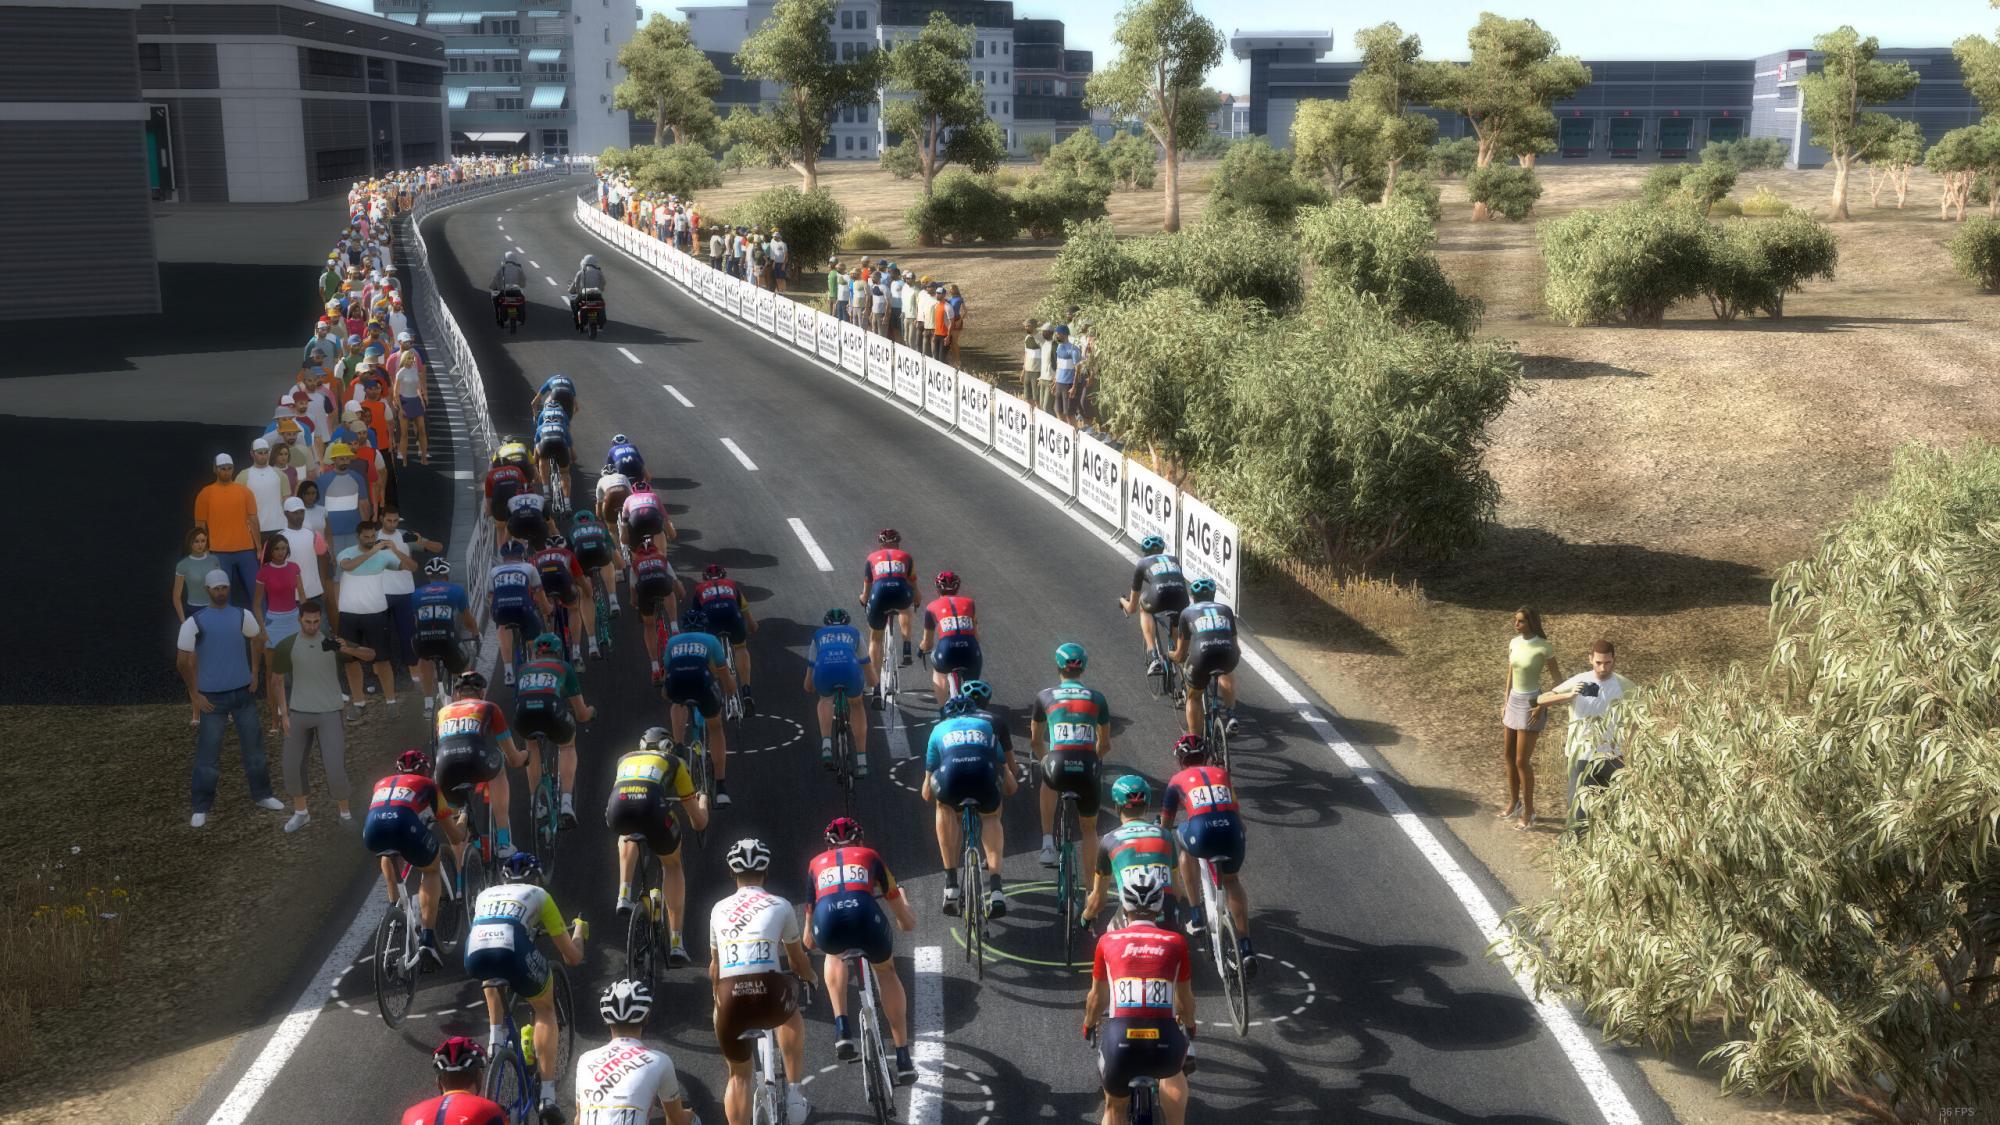 Pro Cycling Manager 2022 [SKIDROW] Free Download PC Game in Direct Link